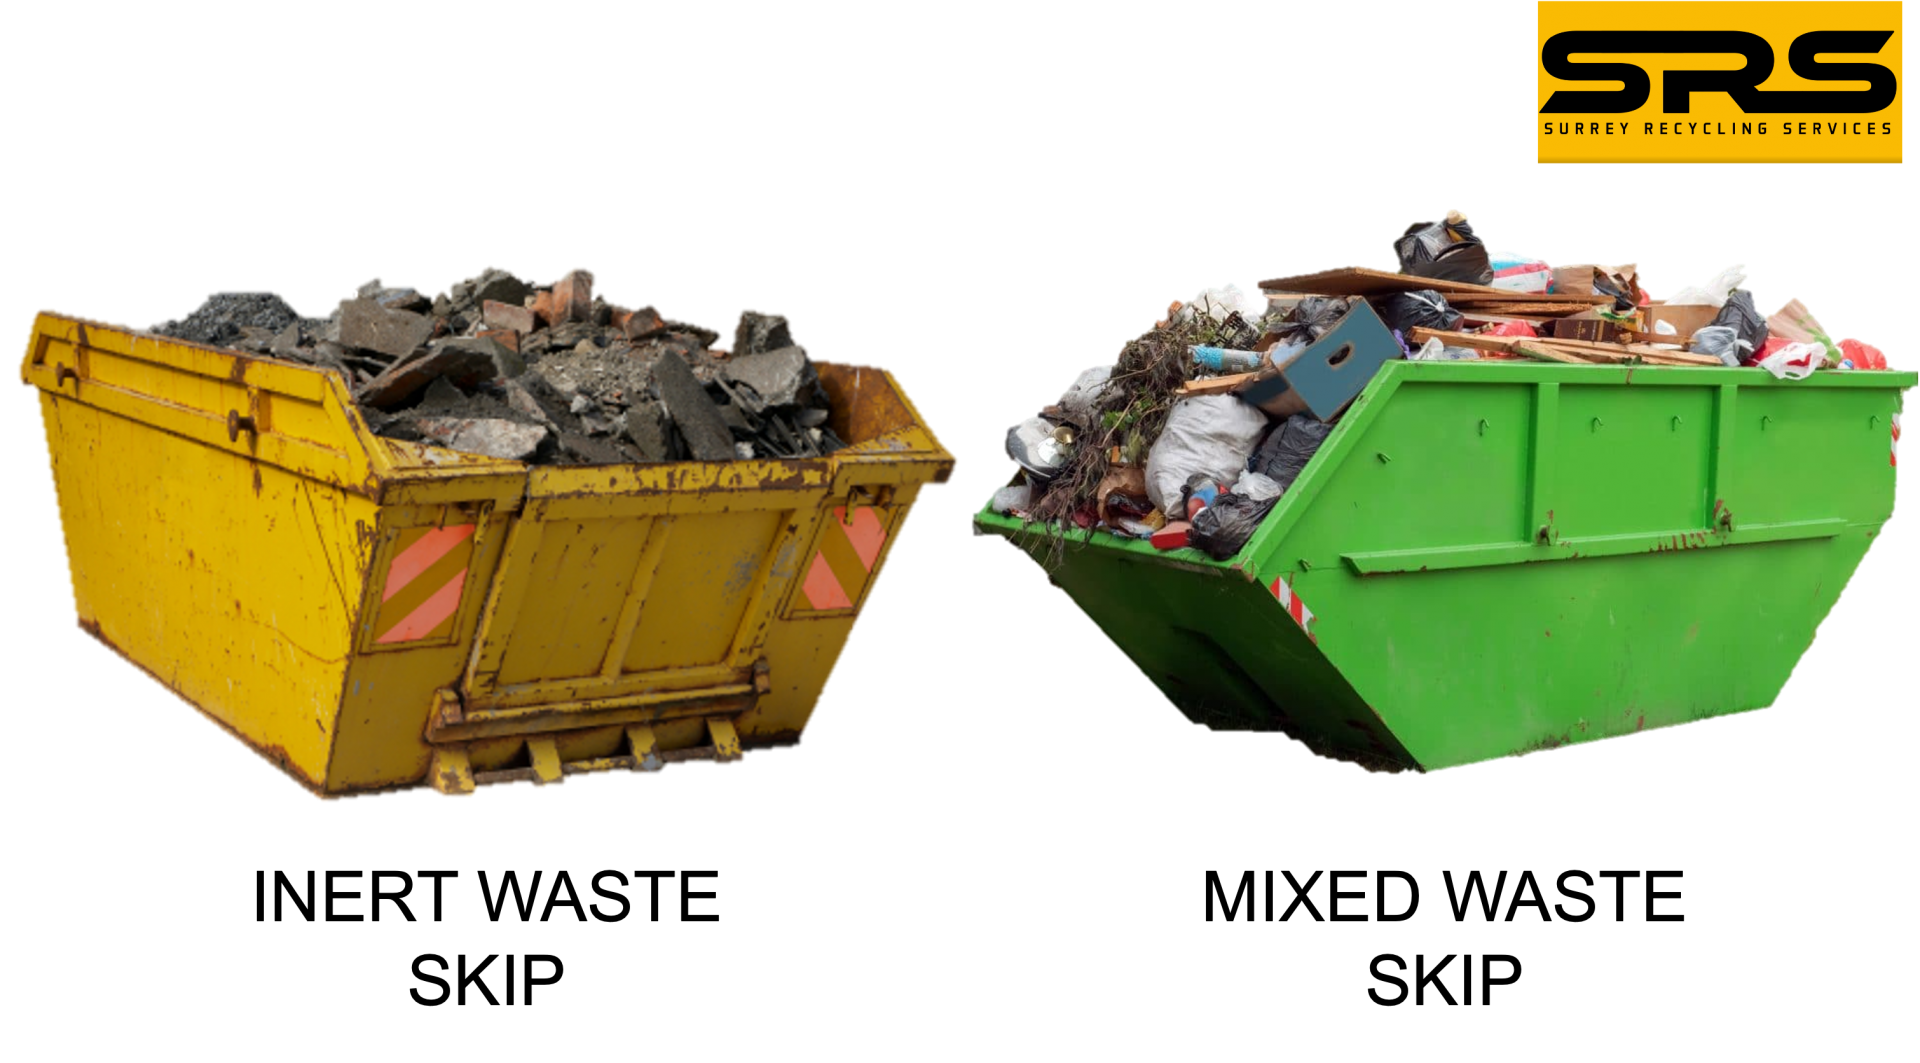 Inert Waste and Mixed Waste Skips